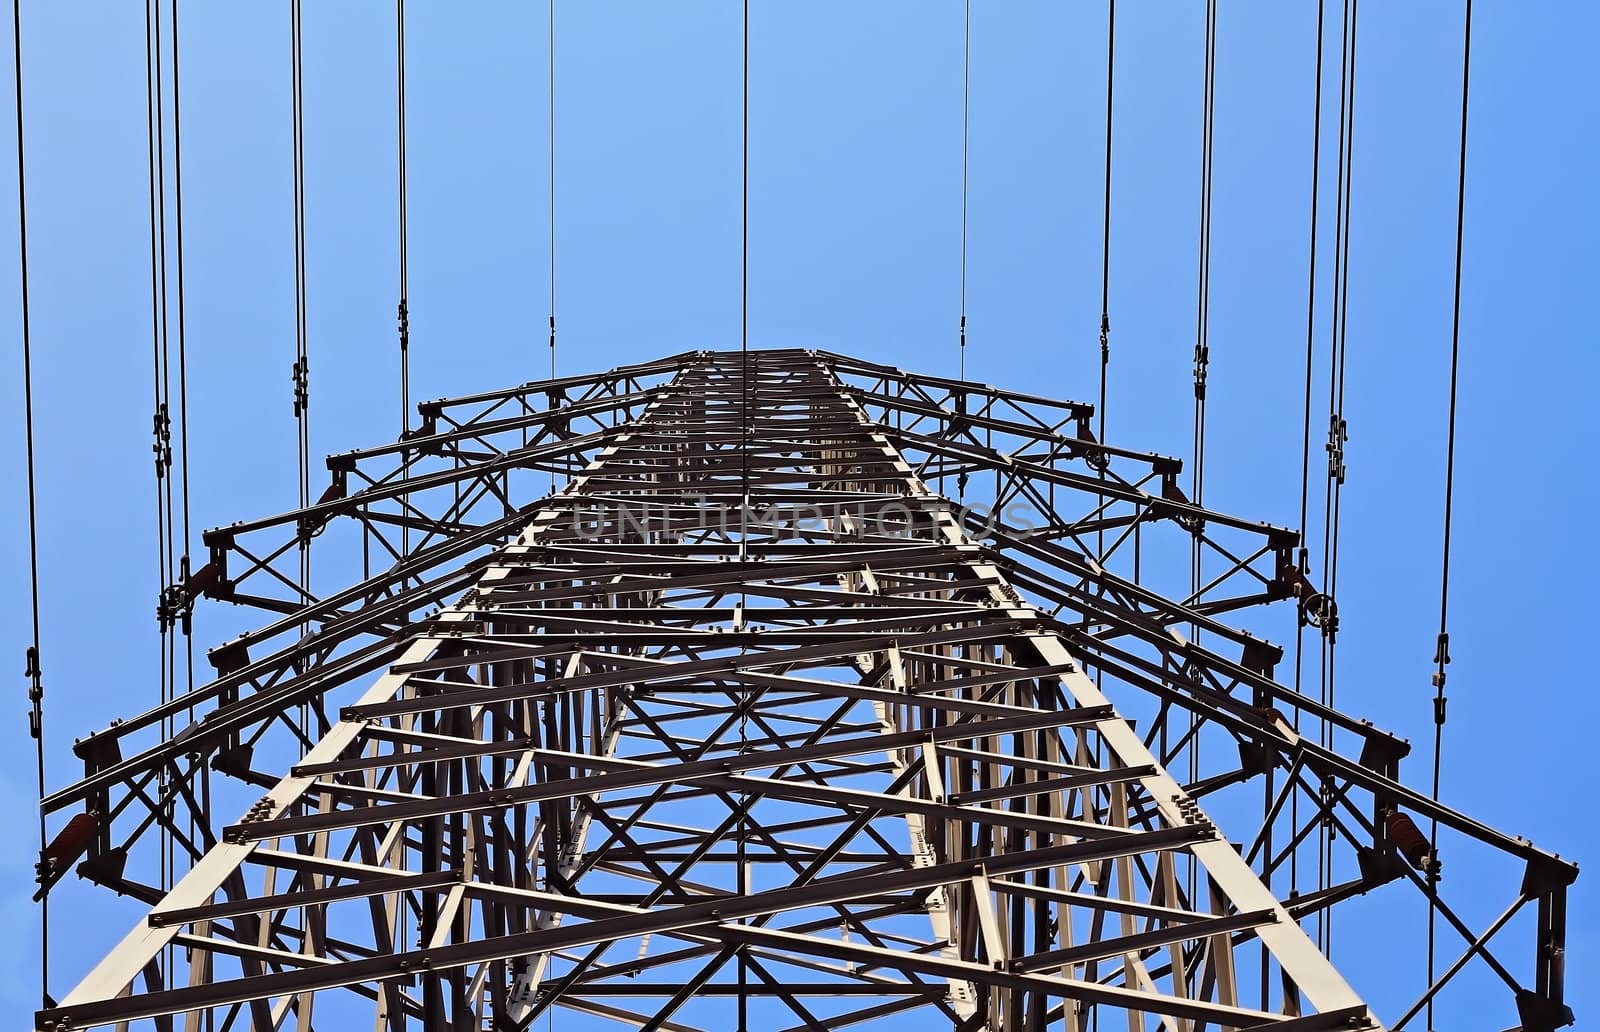 A photo of a high voltage transmission tower